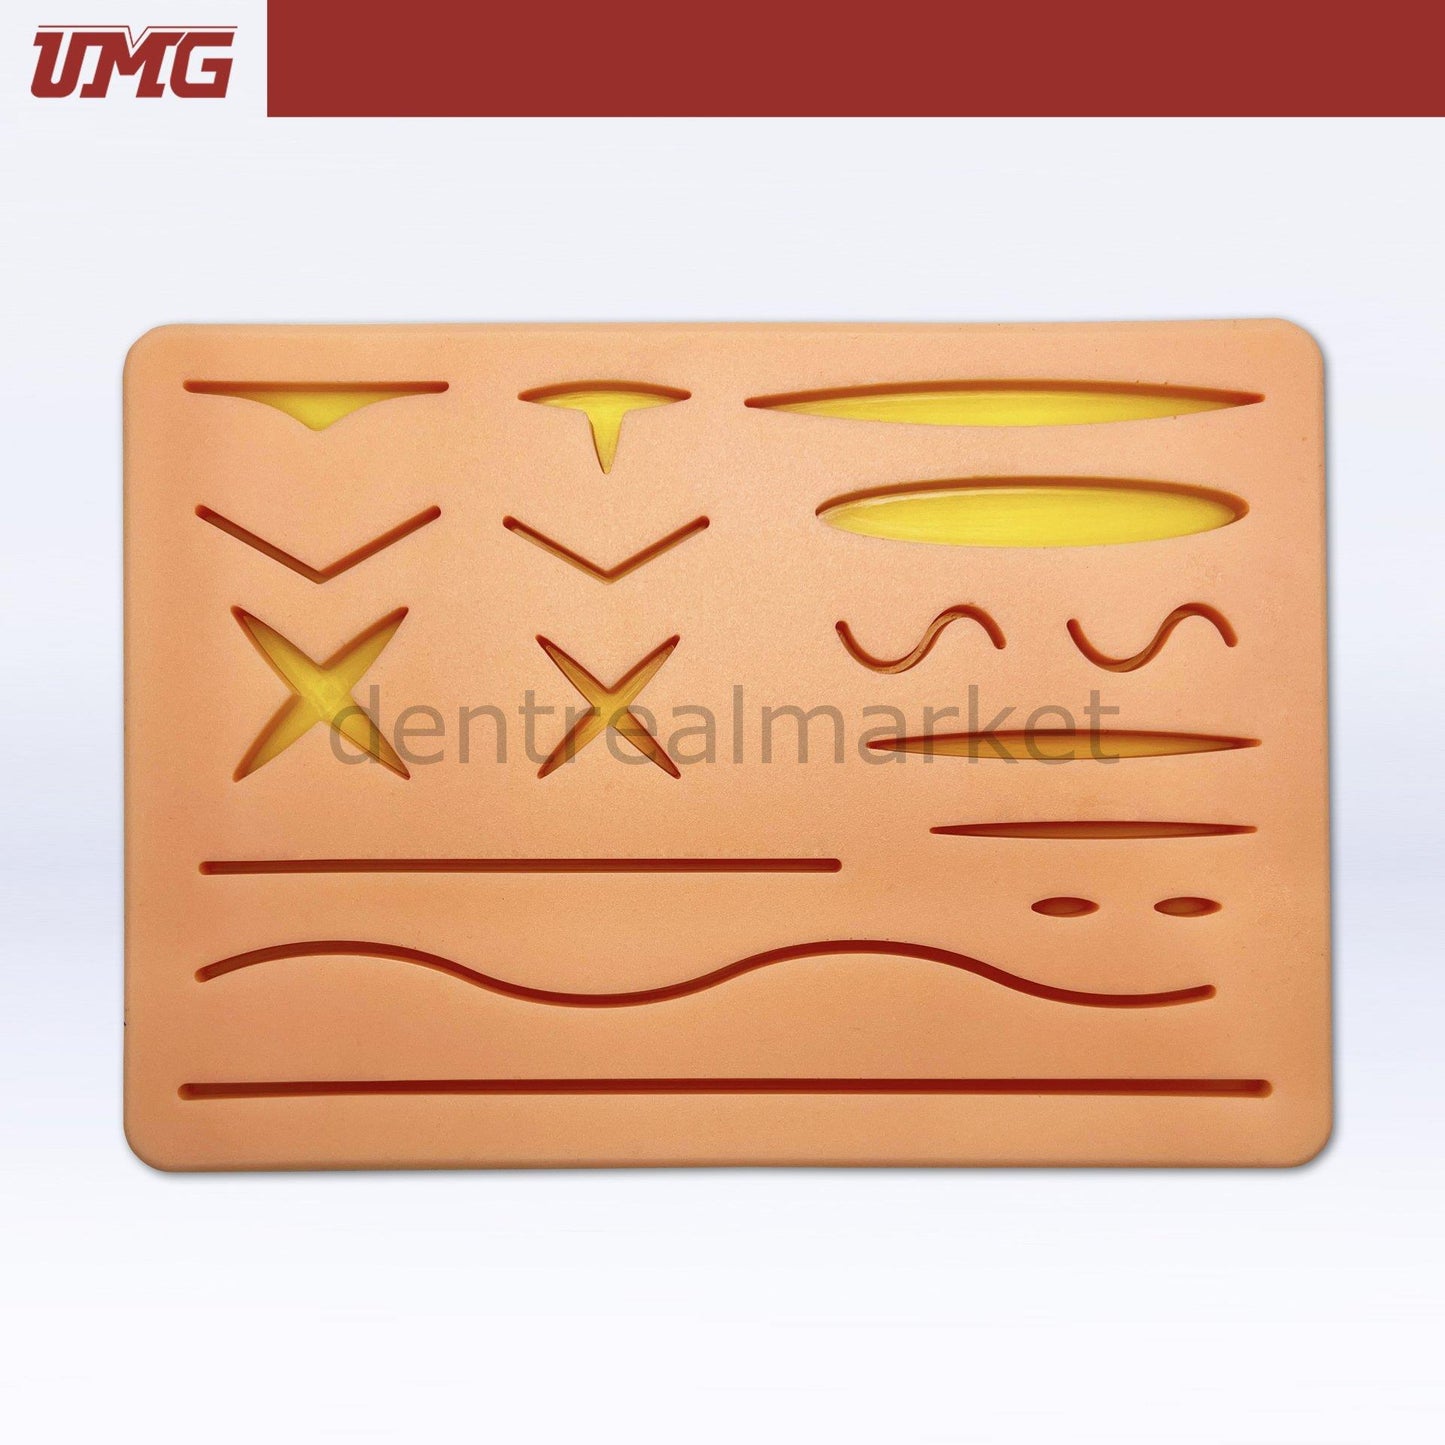 Dental Suture Model Practice Pad Only Silicon - Table Type - UM-U20